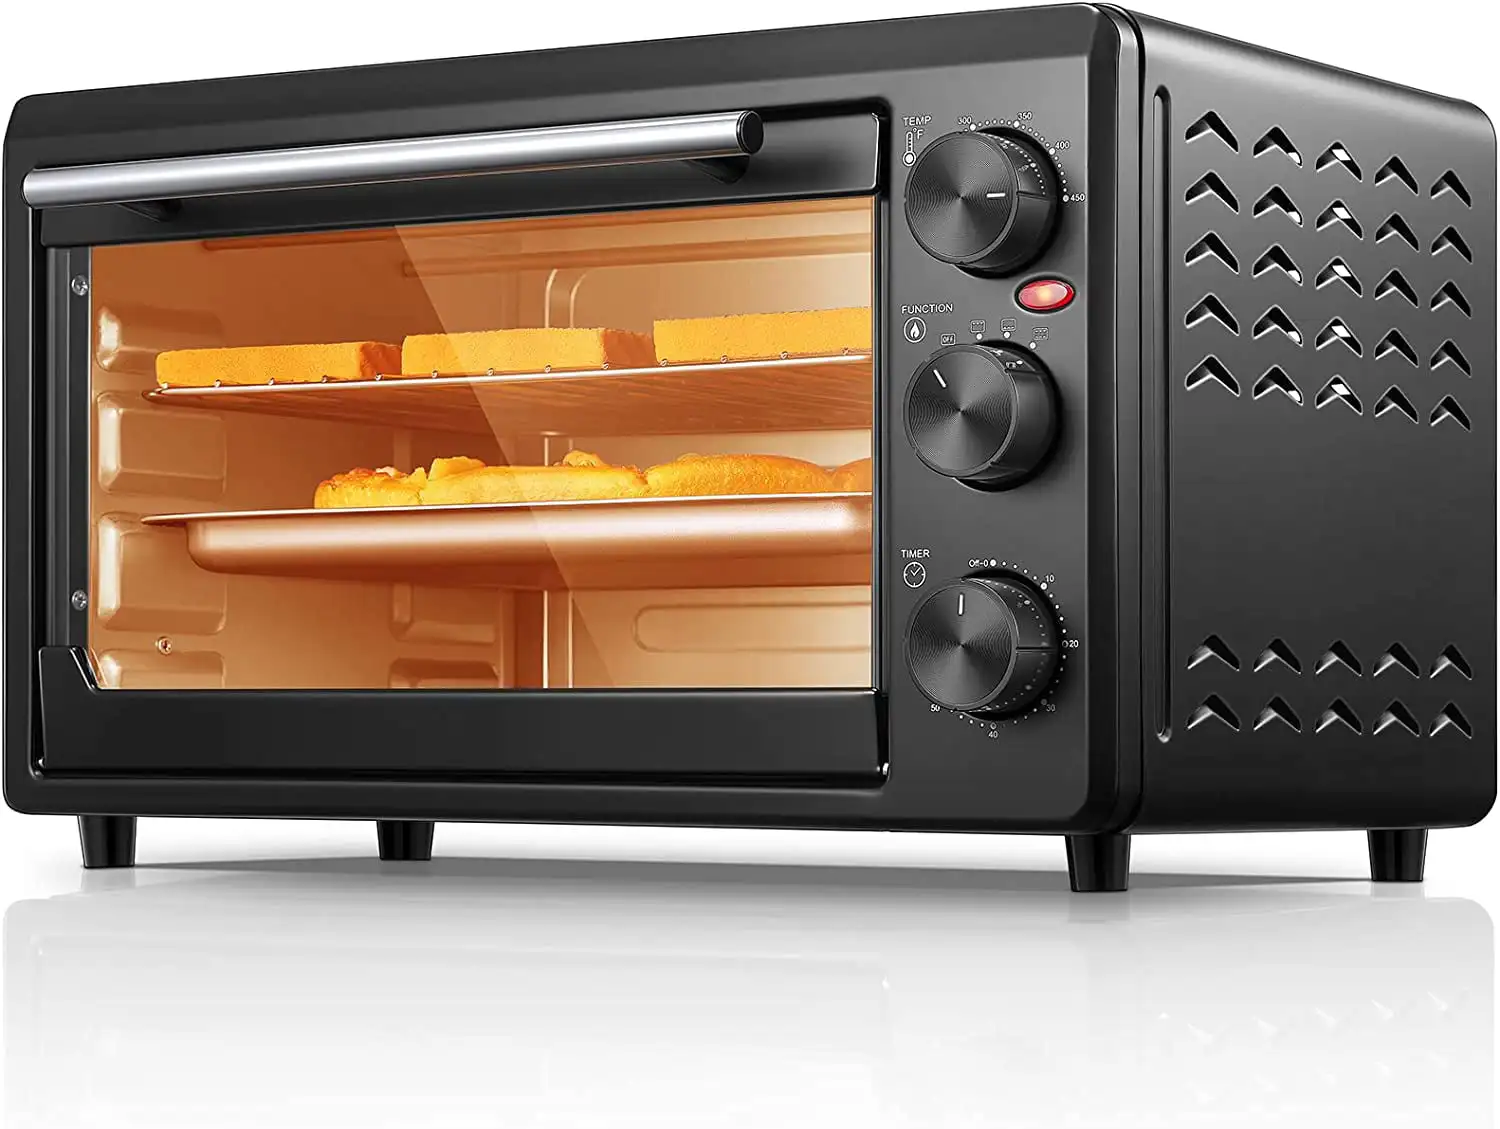 Toaster Oven, 6-Slice Toaster and Countertop Oven, Stainless Steel Multifunction Toaster Oven with Timer - Toast - Bake - Broil